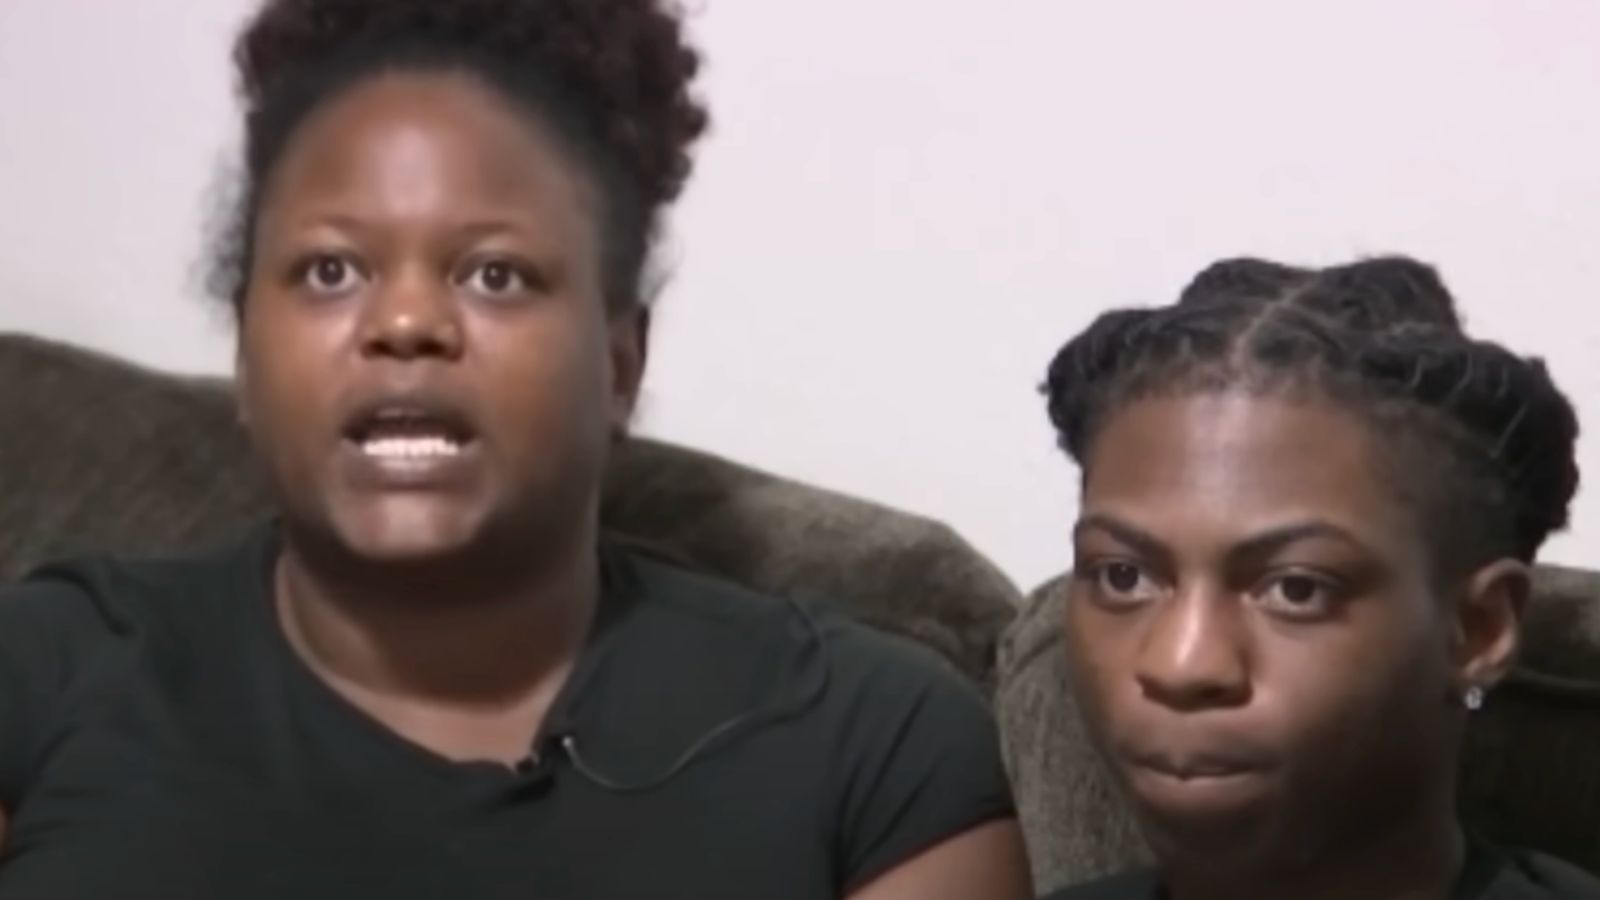 Family files lawsuit after Texas student suspended for hairstyle - Dexerto